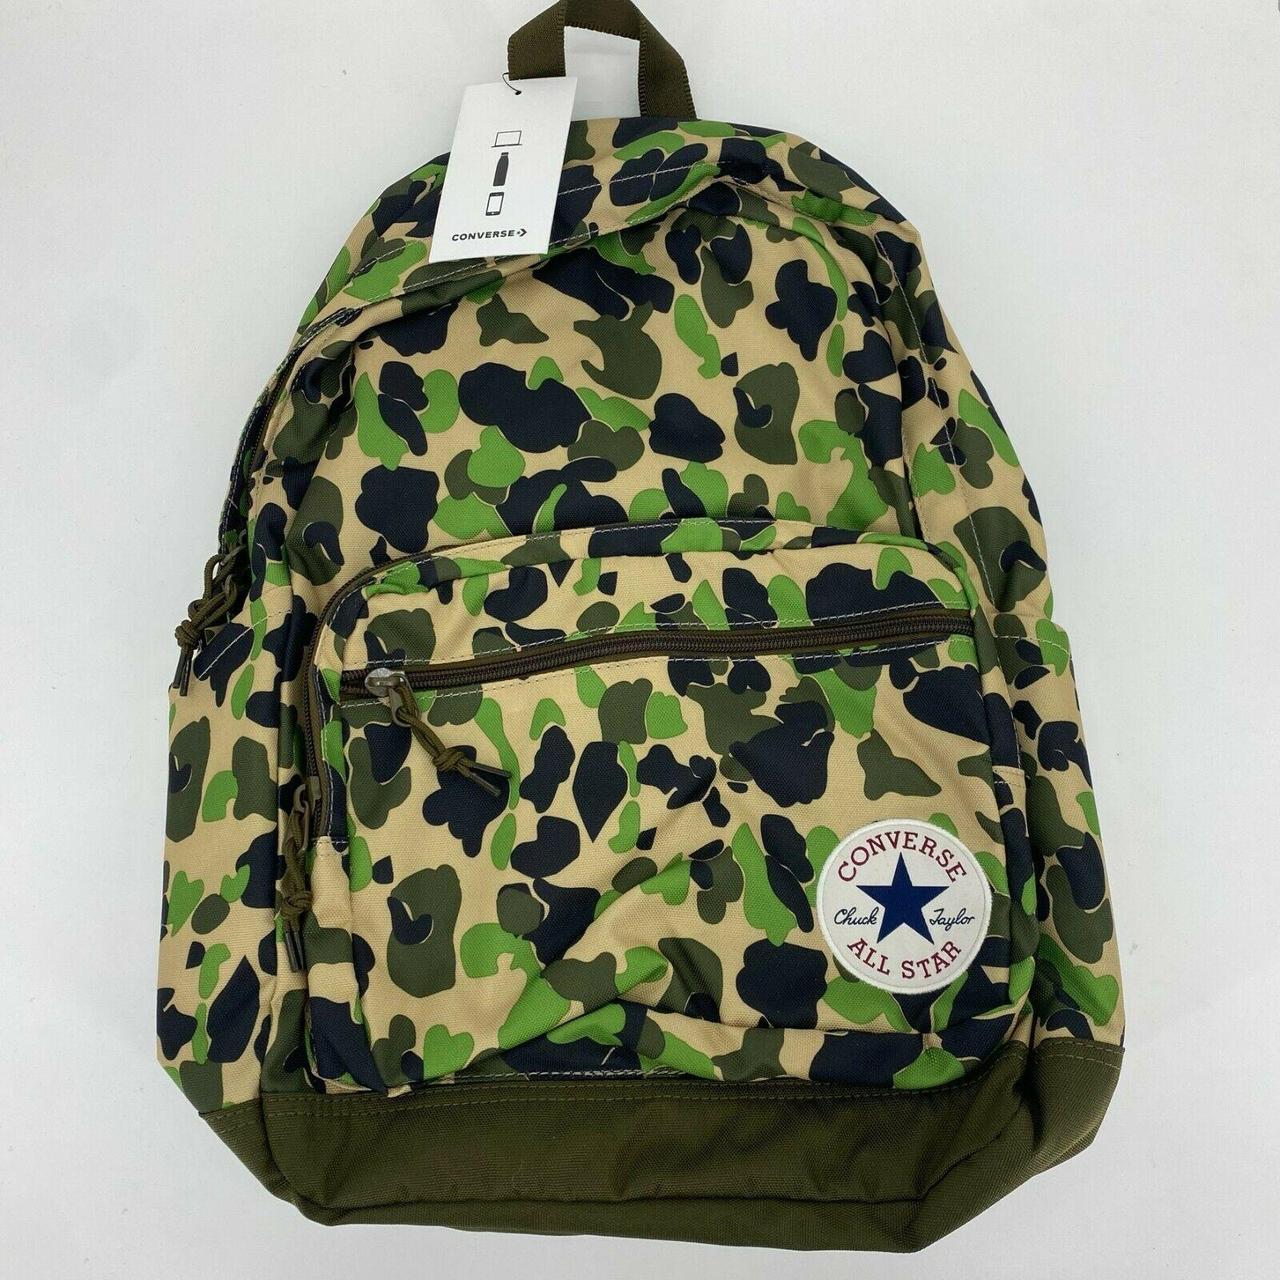 Converse GO 2 Camouflage Backpack School Bag